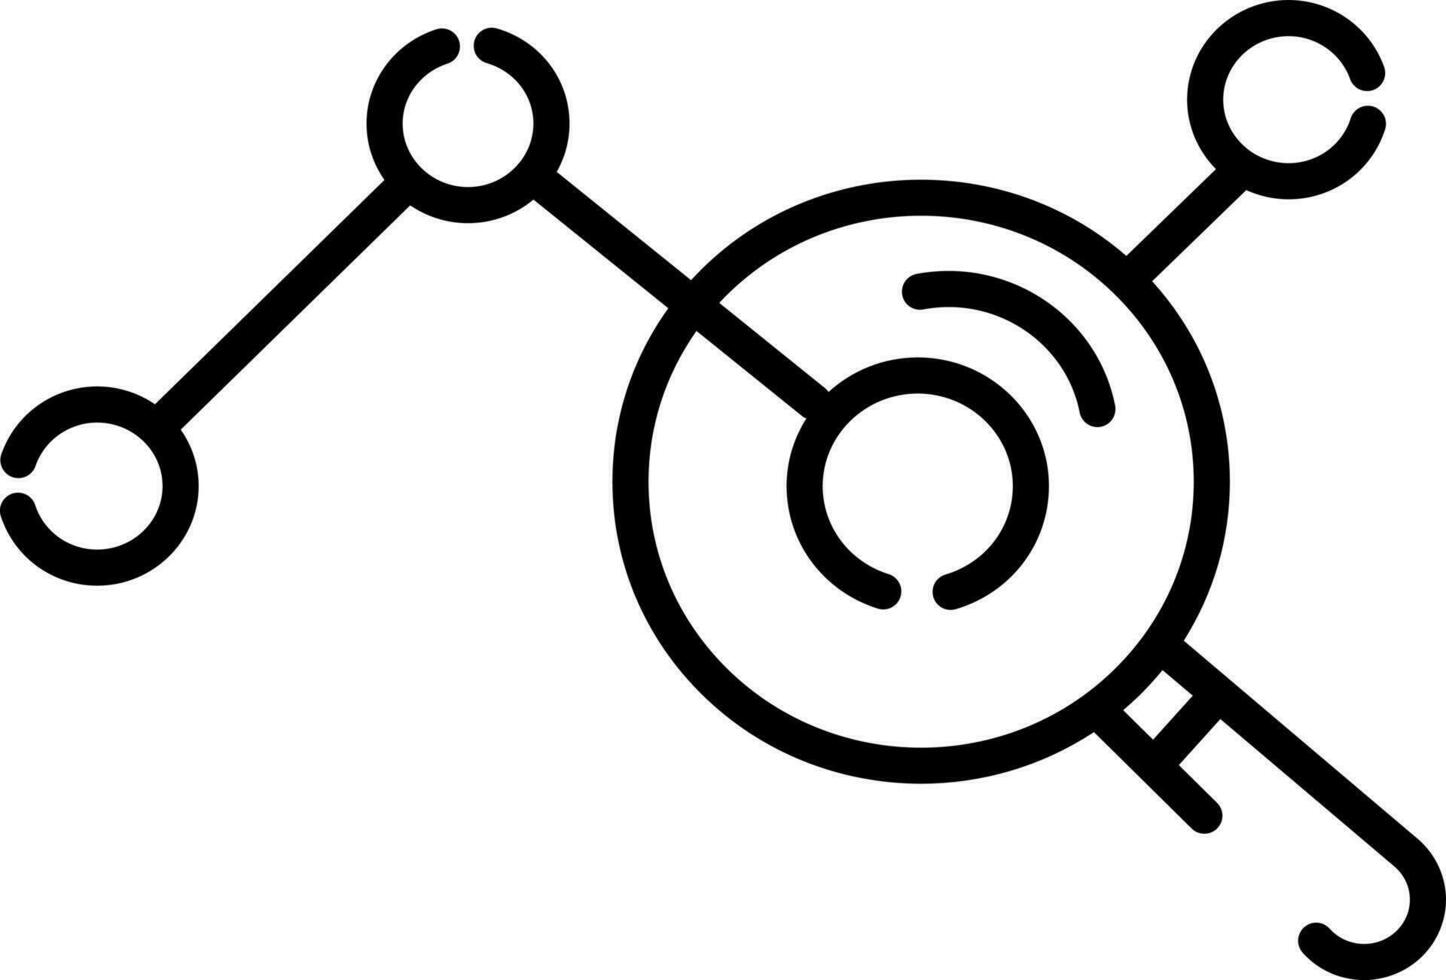 Illustration of research line art icon. vector